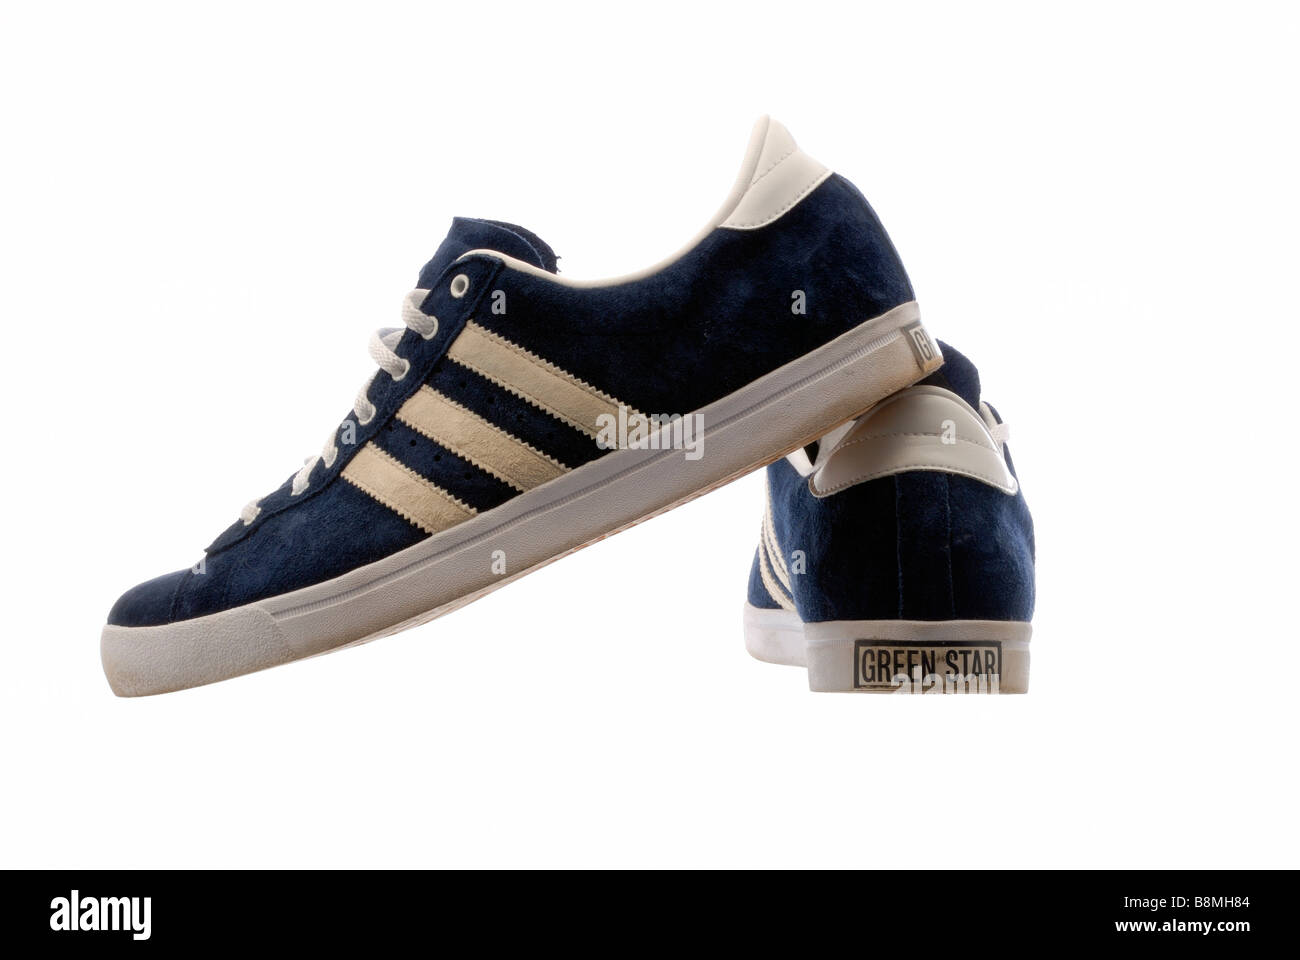 Blue and Cream Adidas Green Star Trainers on White Cutout Stock Photo -  Alamy